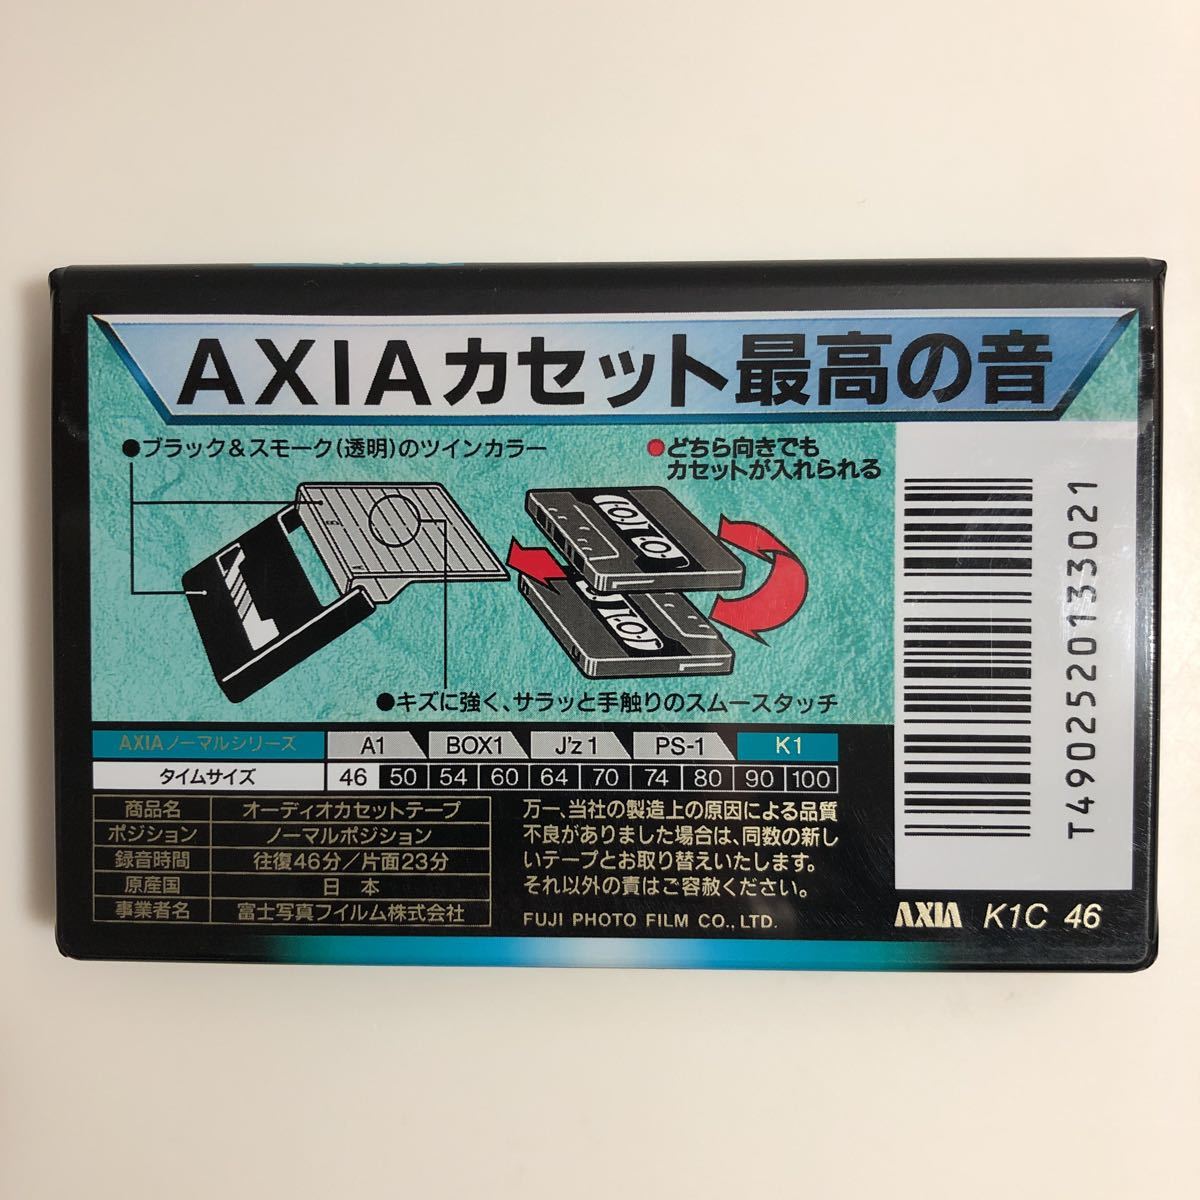  cassette tape normal position AXIA K1 46 minute 2 ps 